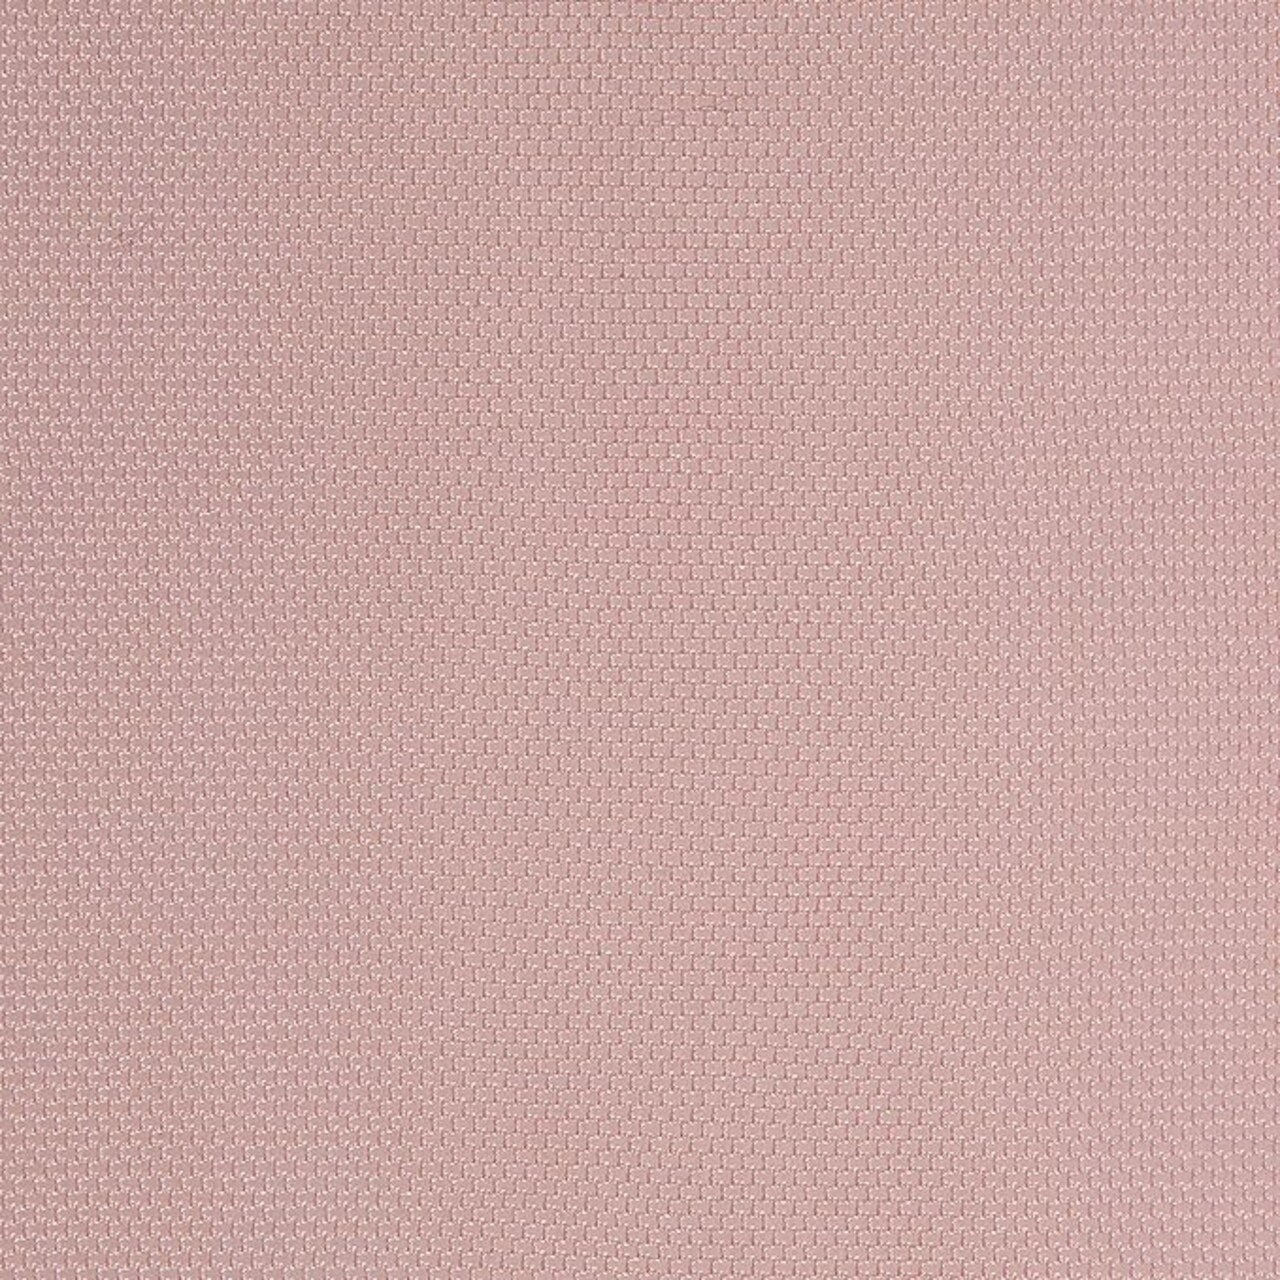 FabricLA Power Mesh Fabric Nylon Spandex - 60 Inches (150 cm) Wide - Use Mesh  Fabric for Sewing, Sports Wear, Ballet, Workout Tights, Garments - Mesh  Fabric by The Yard - Dusty Pink, 5 Continuous Yards